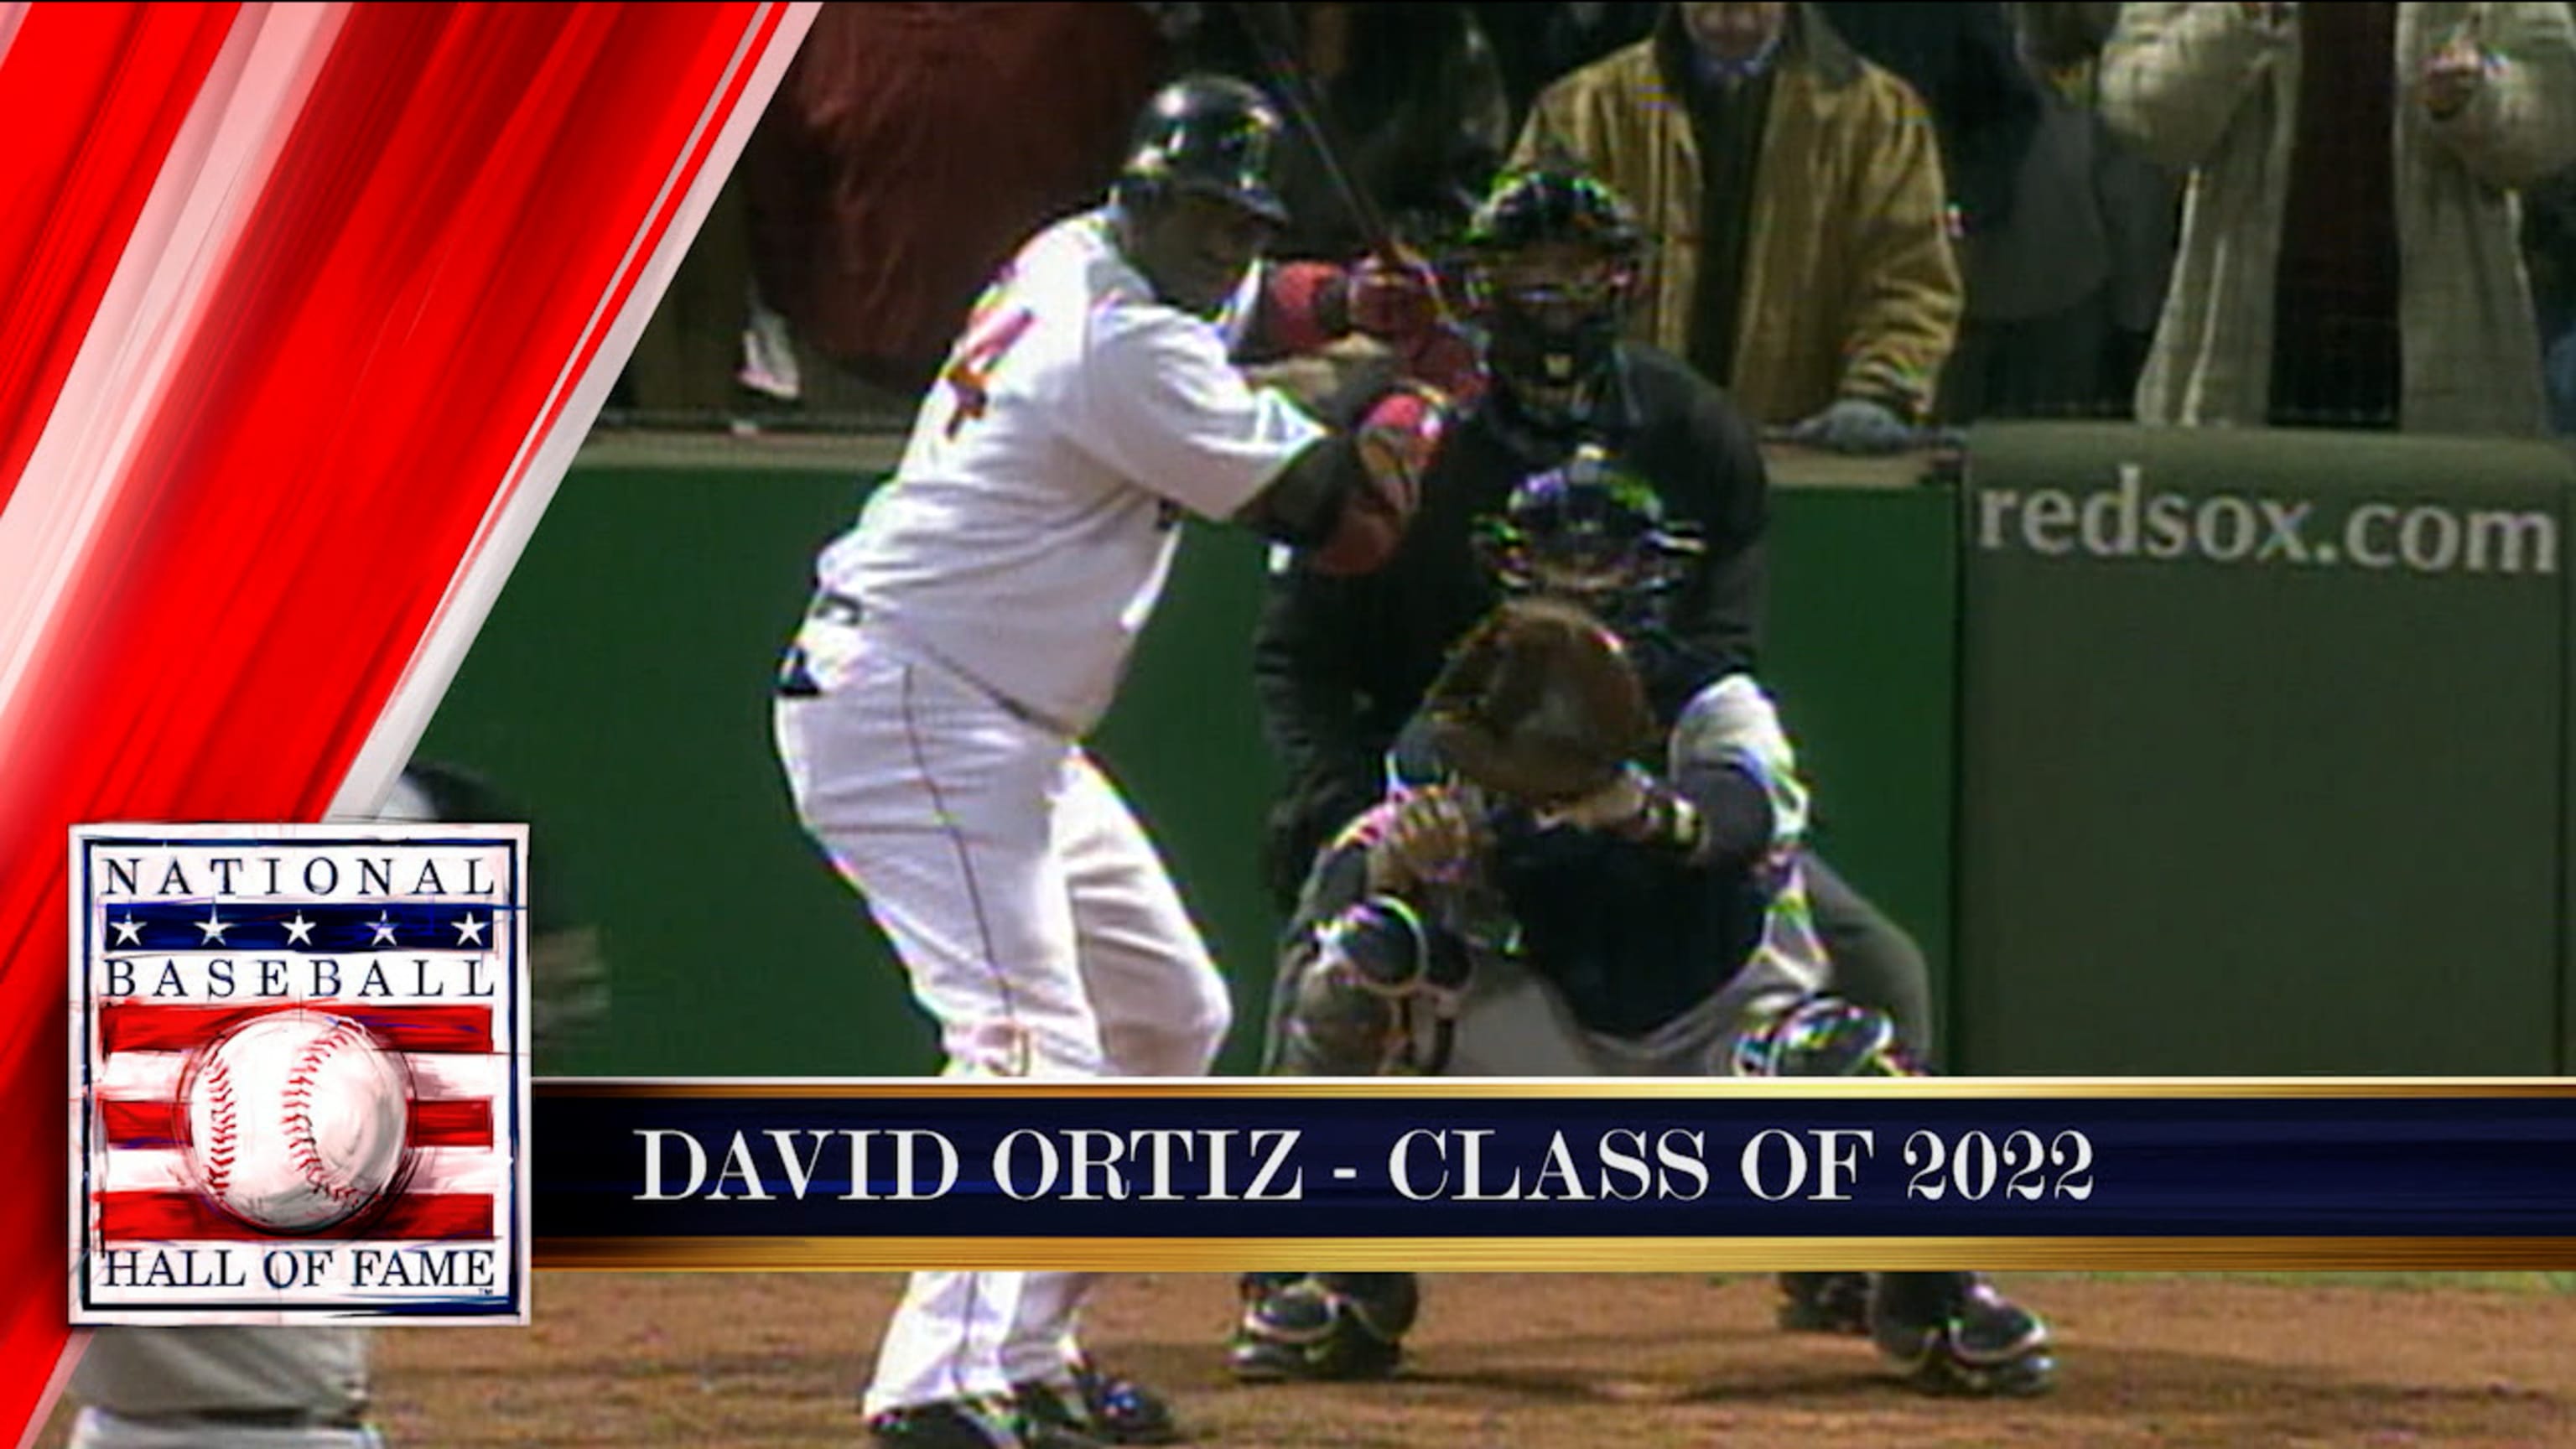 David Ortiz's election seems to be another sign of a shift in Hall